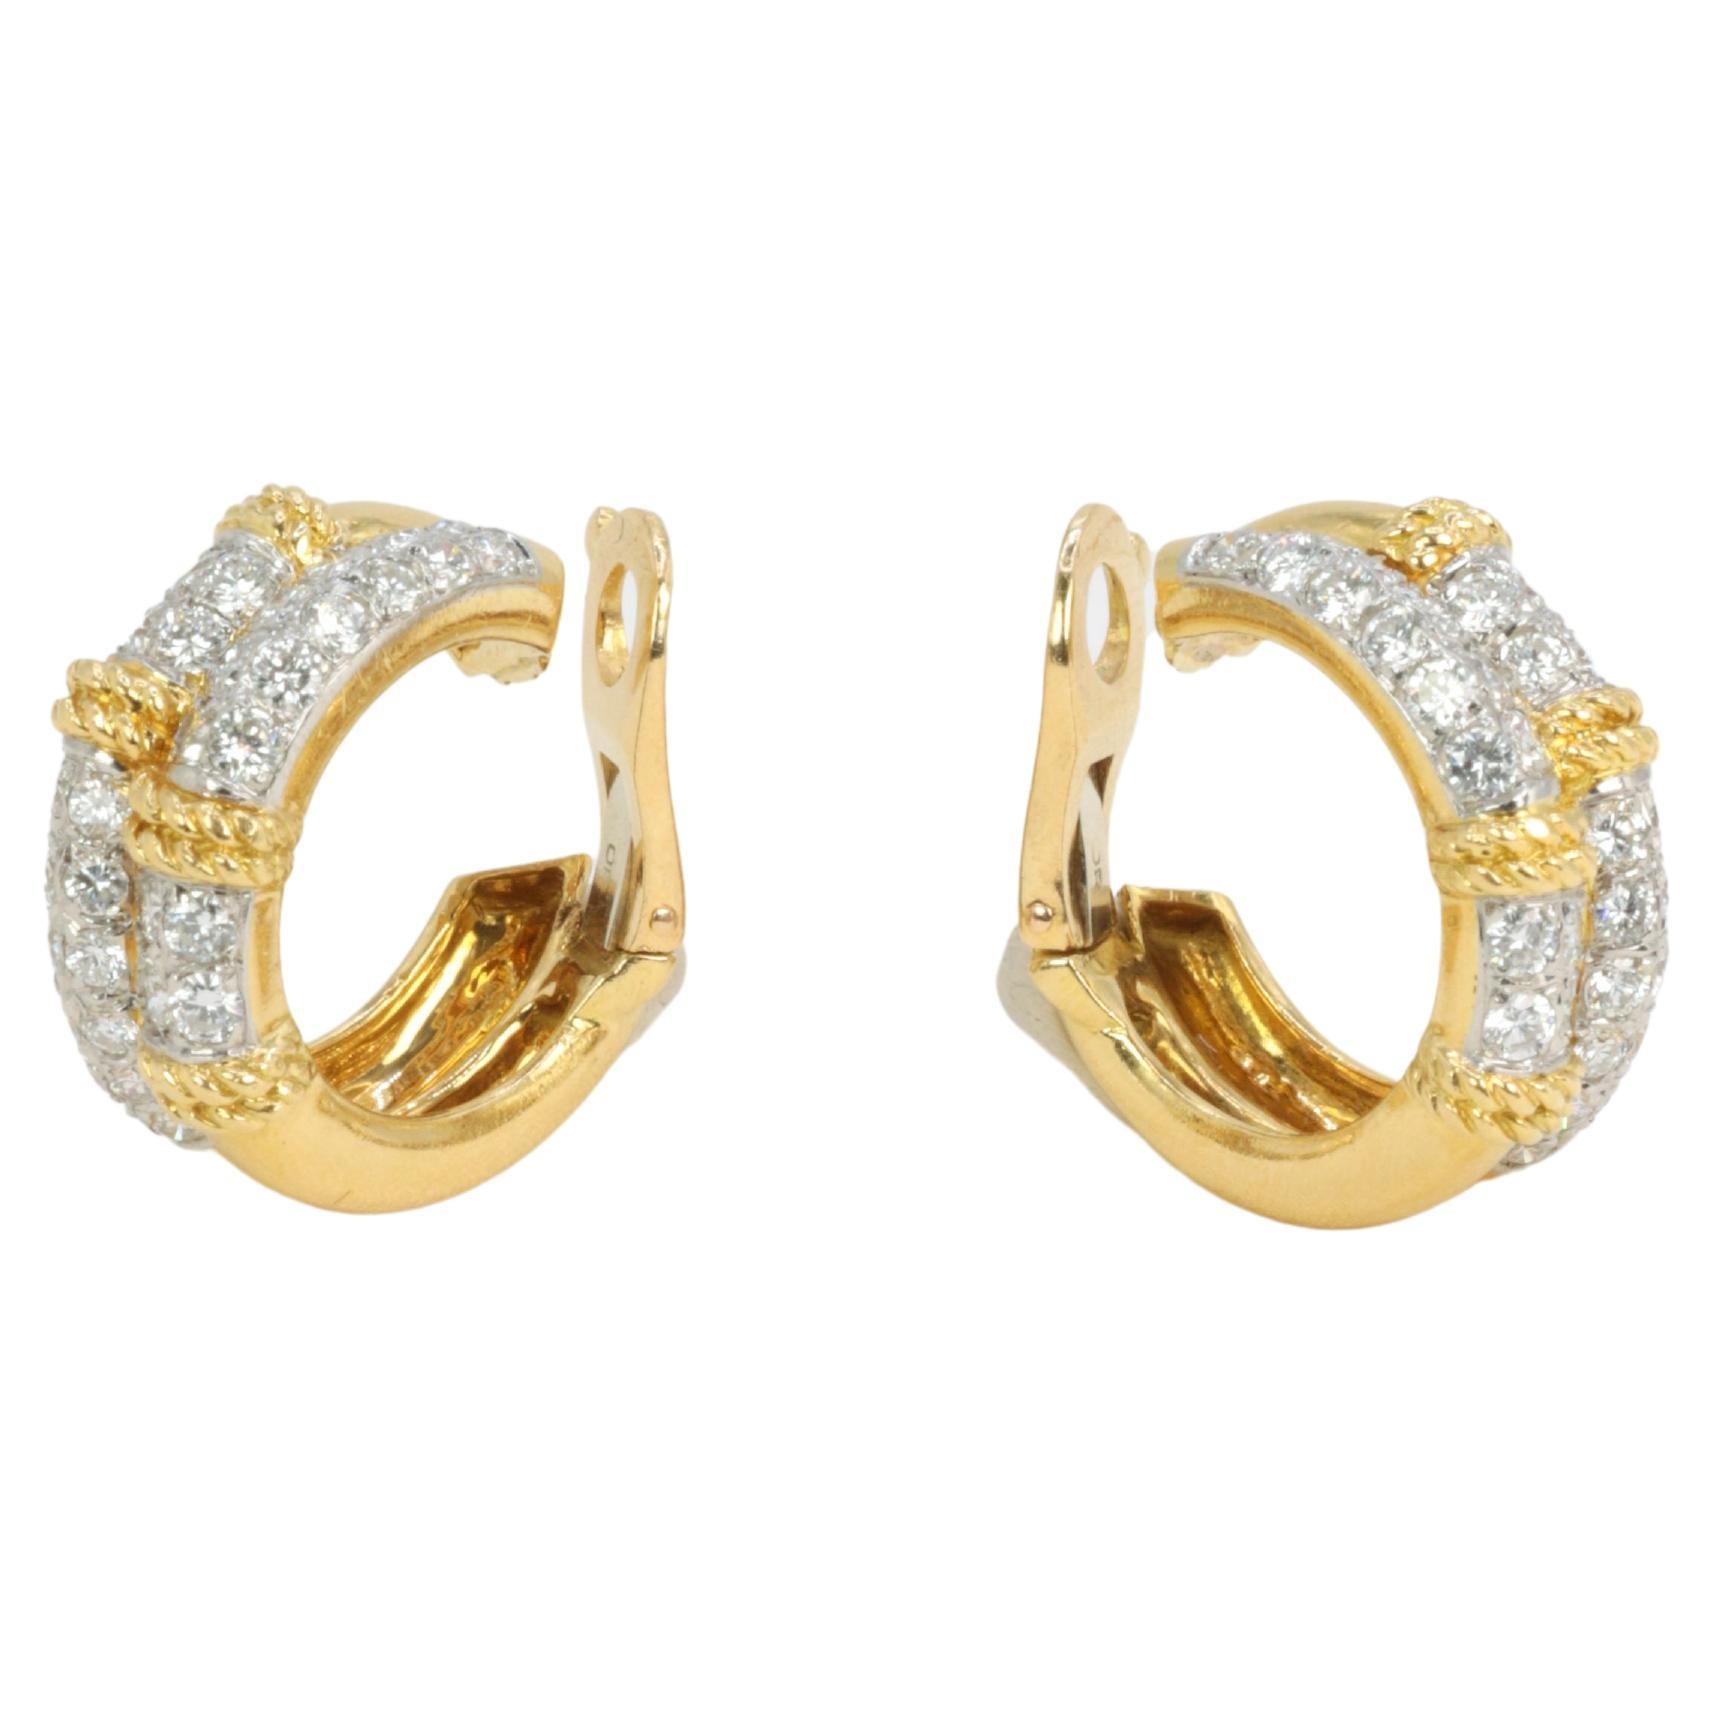 Pair of Vintage Fred "Isaure" Gold, Platinum and Diamond Earrings For Sale